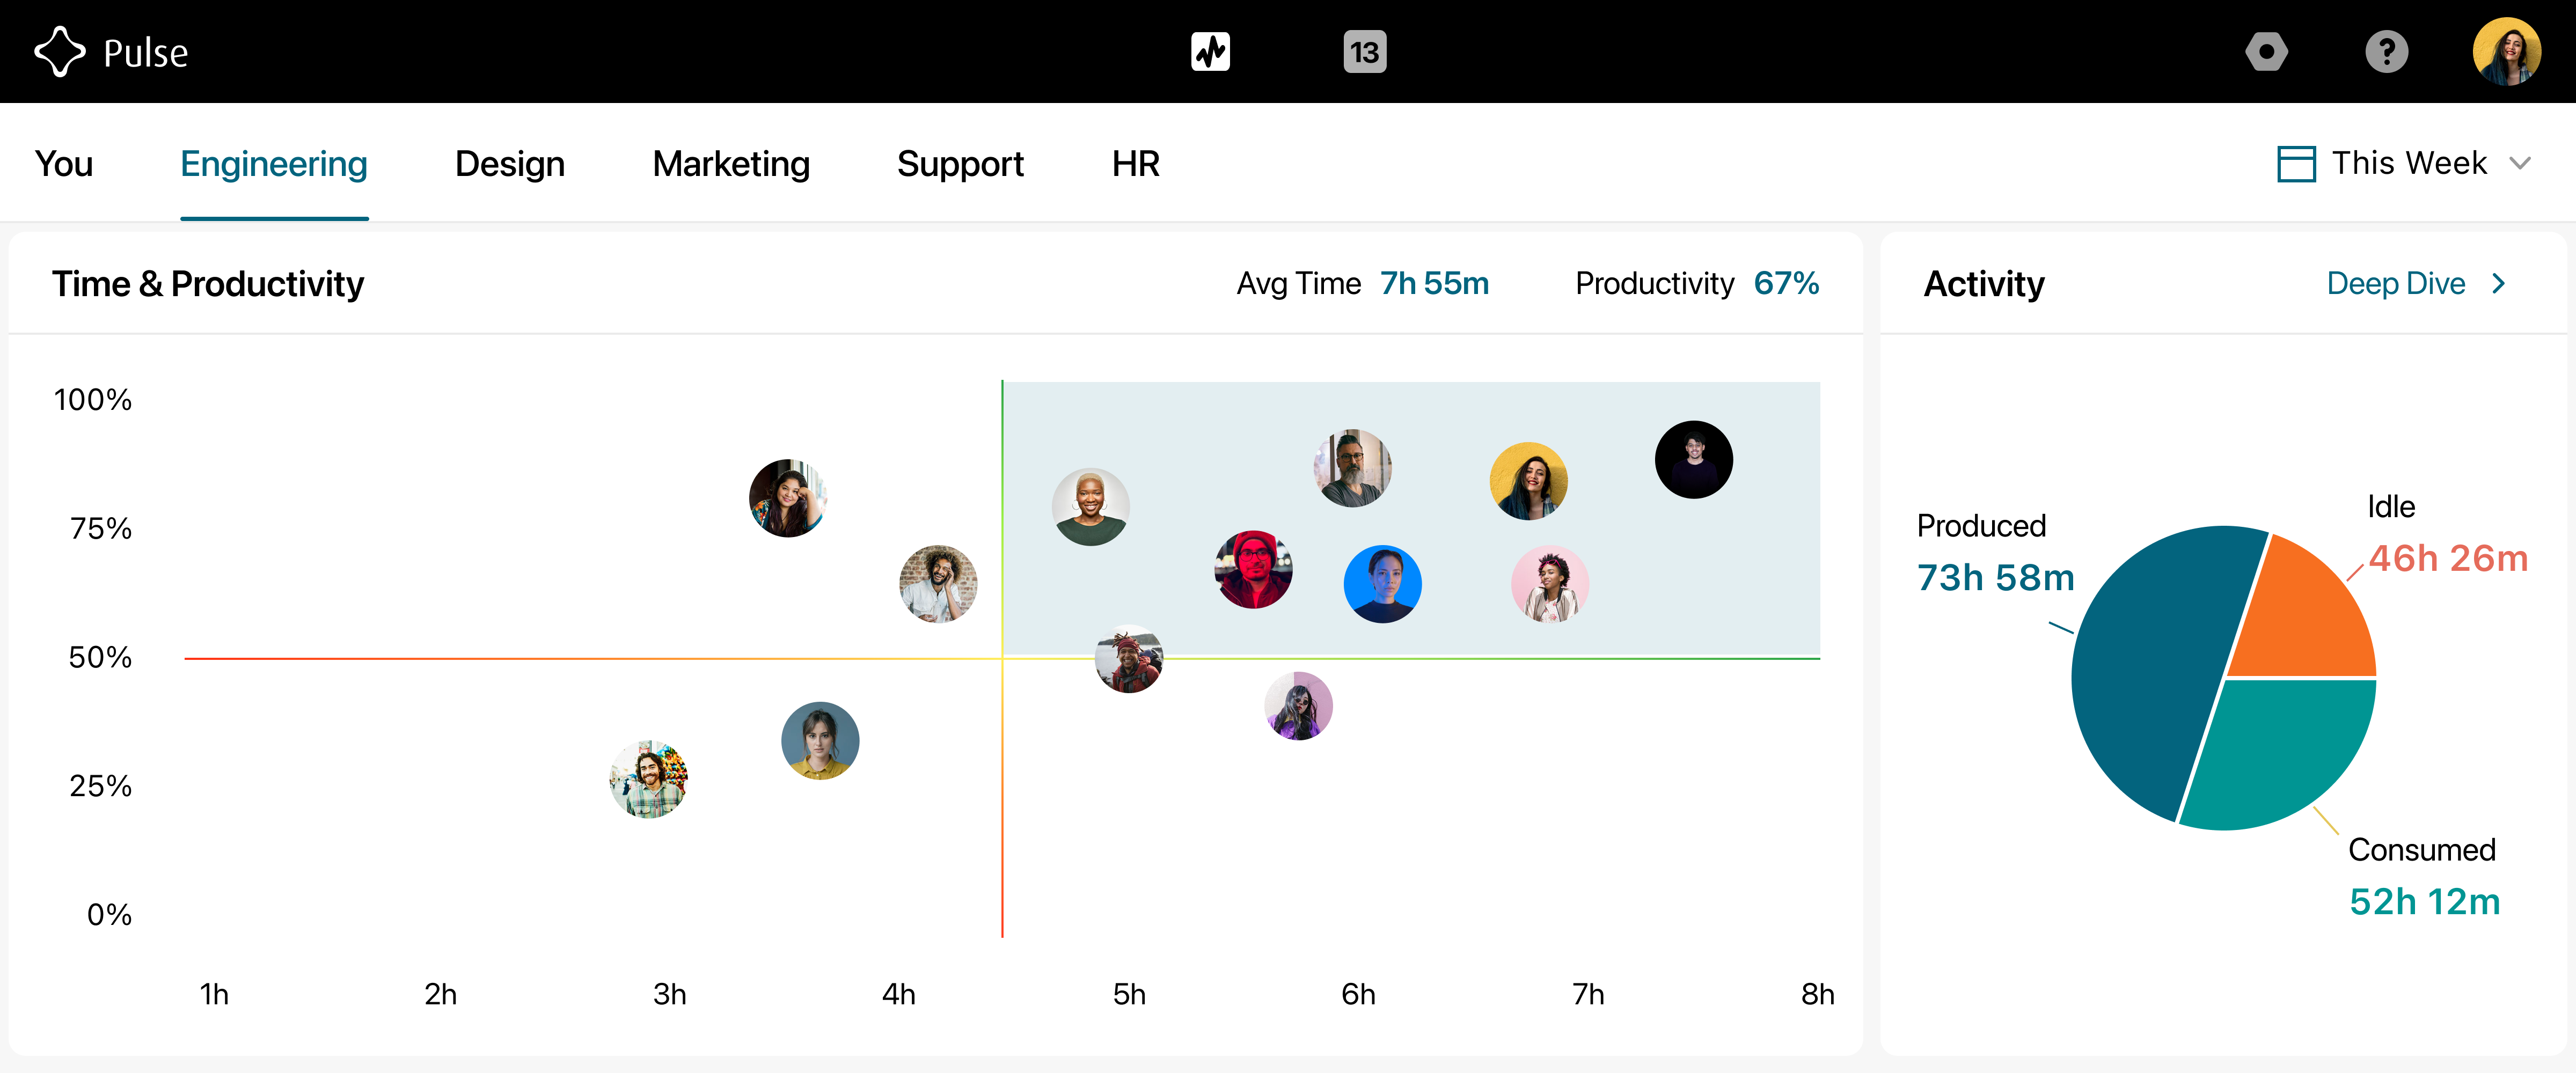 Pulse’s productivity tracking dashboard displaying a toggle tab for different teams, with a graph that plots individual team members' performance based on time versus productivity, and a pie chart breaking down the team's produced, consumed, and idle time.